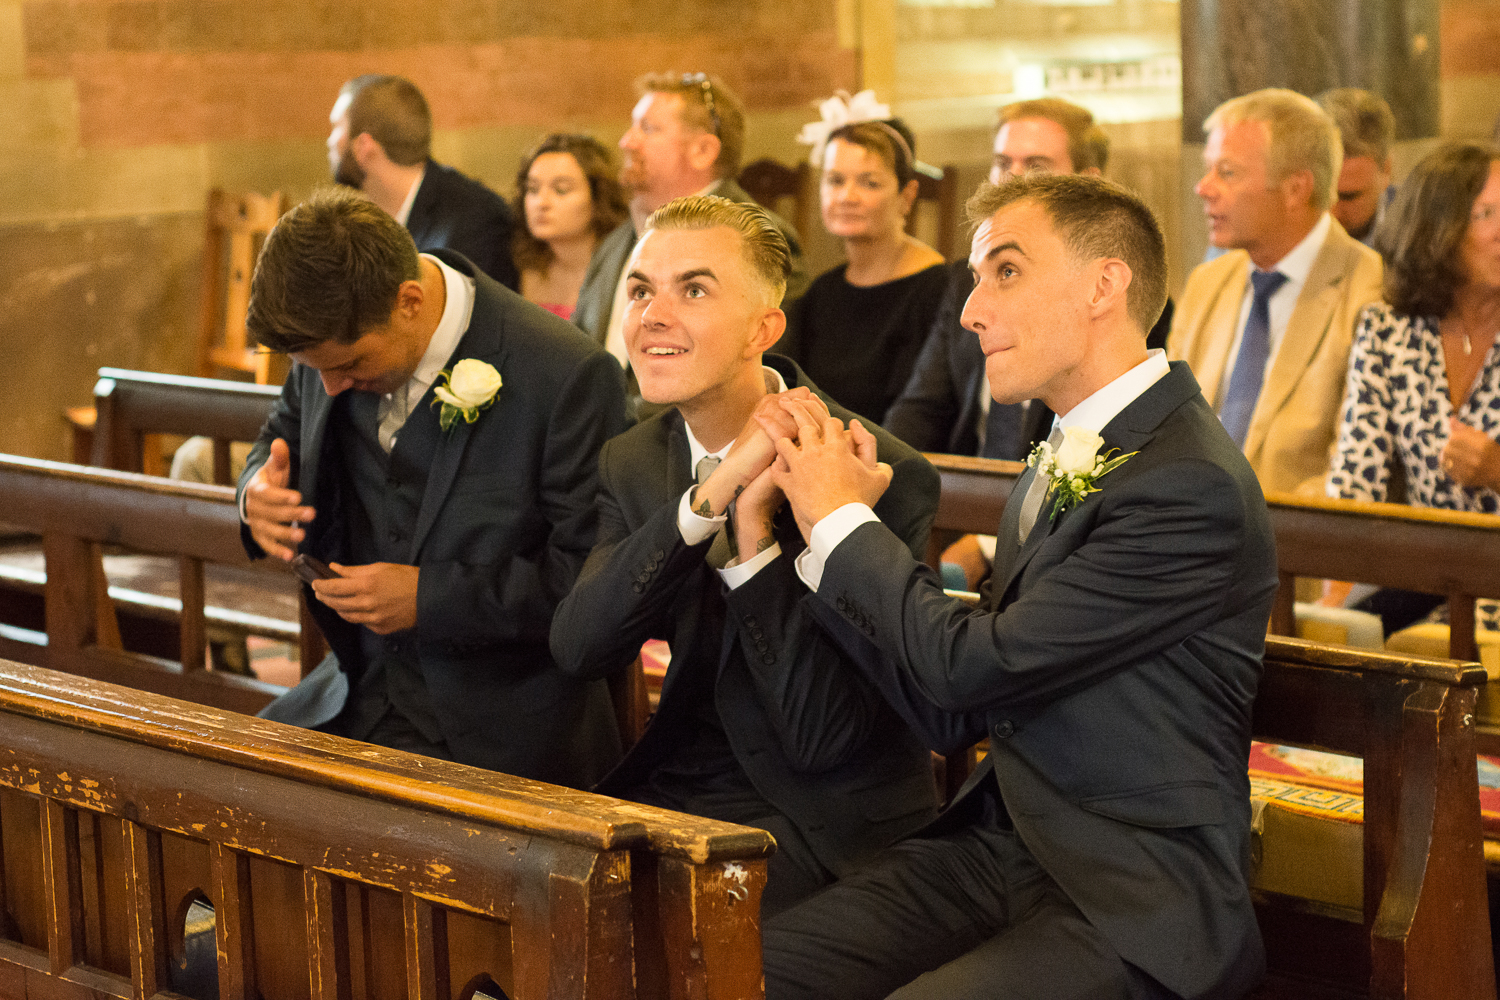 The groom and his brother knock one out of the park at All saints church in Torquay, Devon